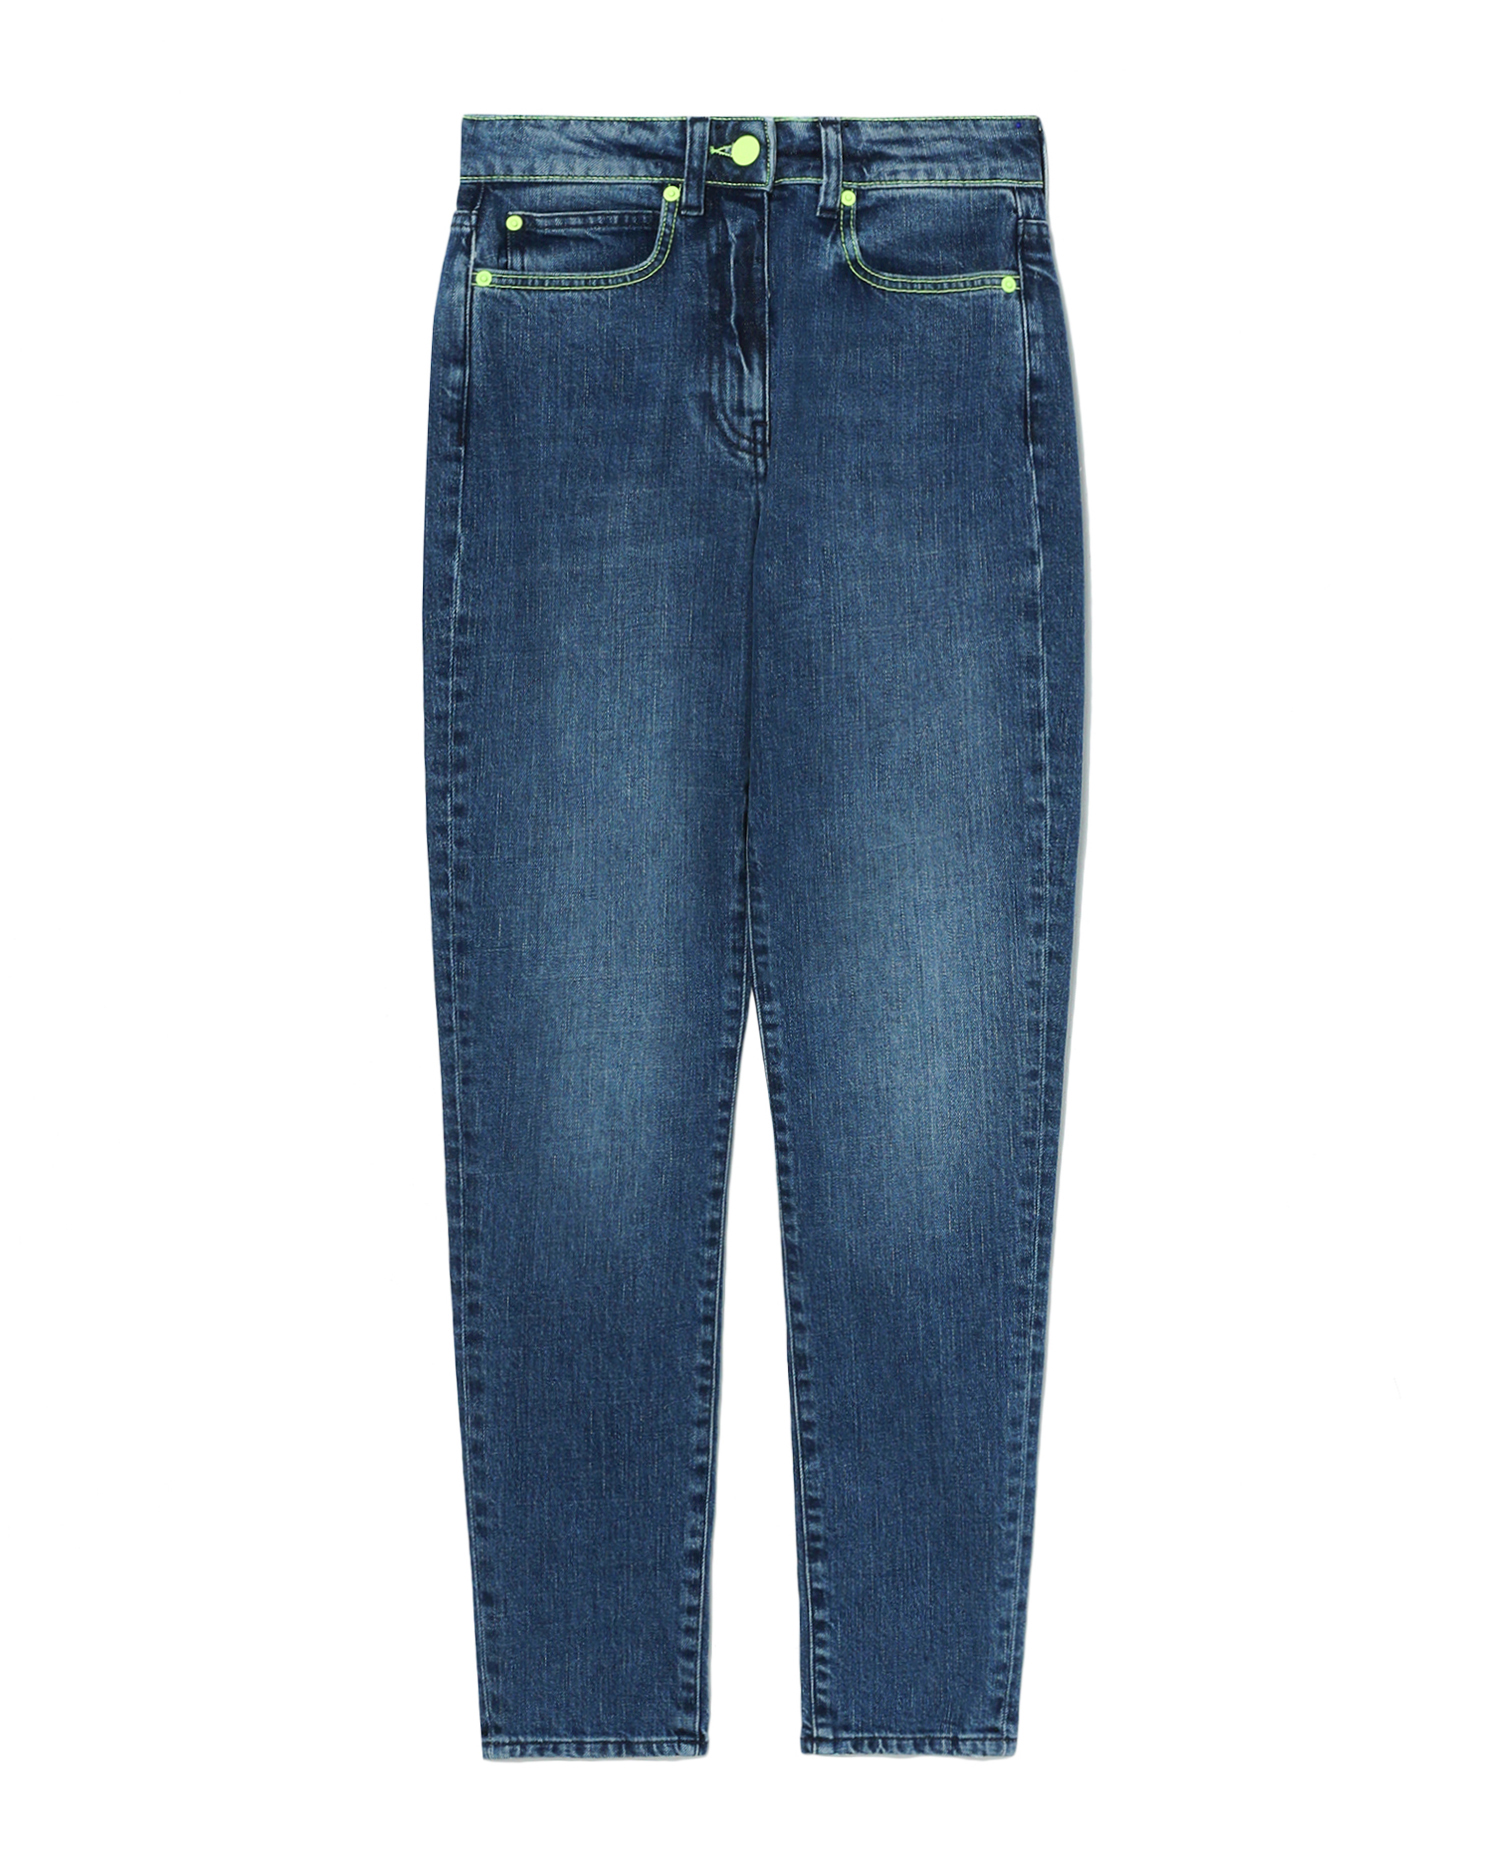 high waisted jeans with fluorescent details